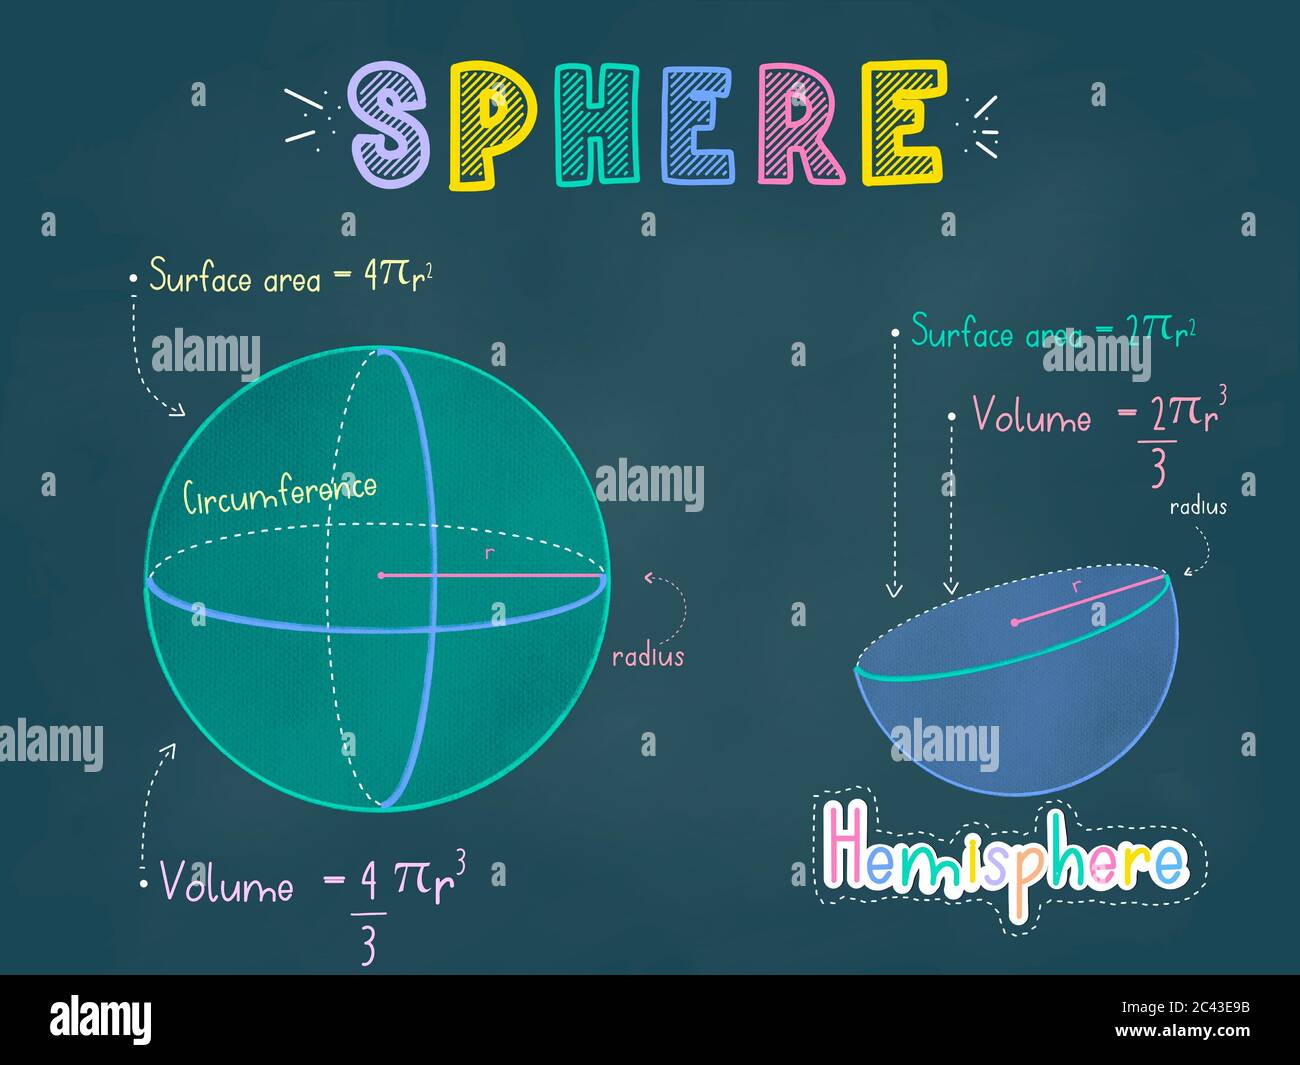 Surface area of sphere